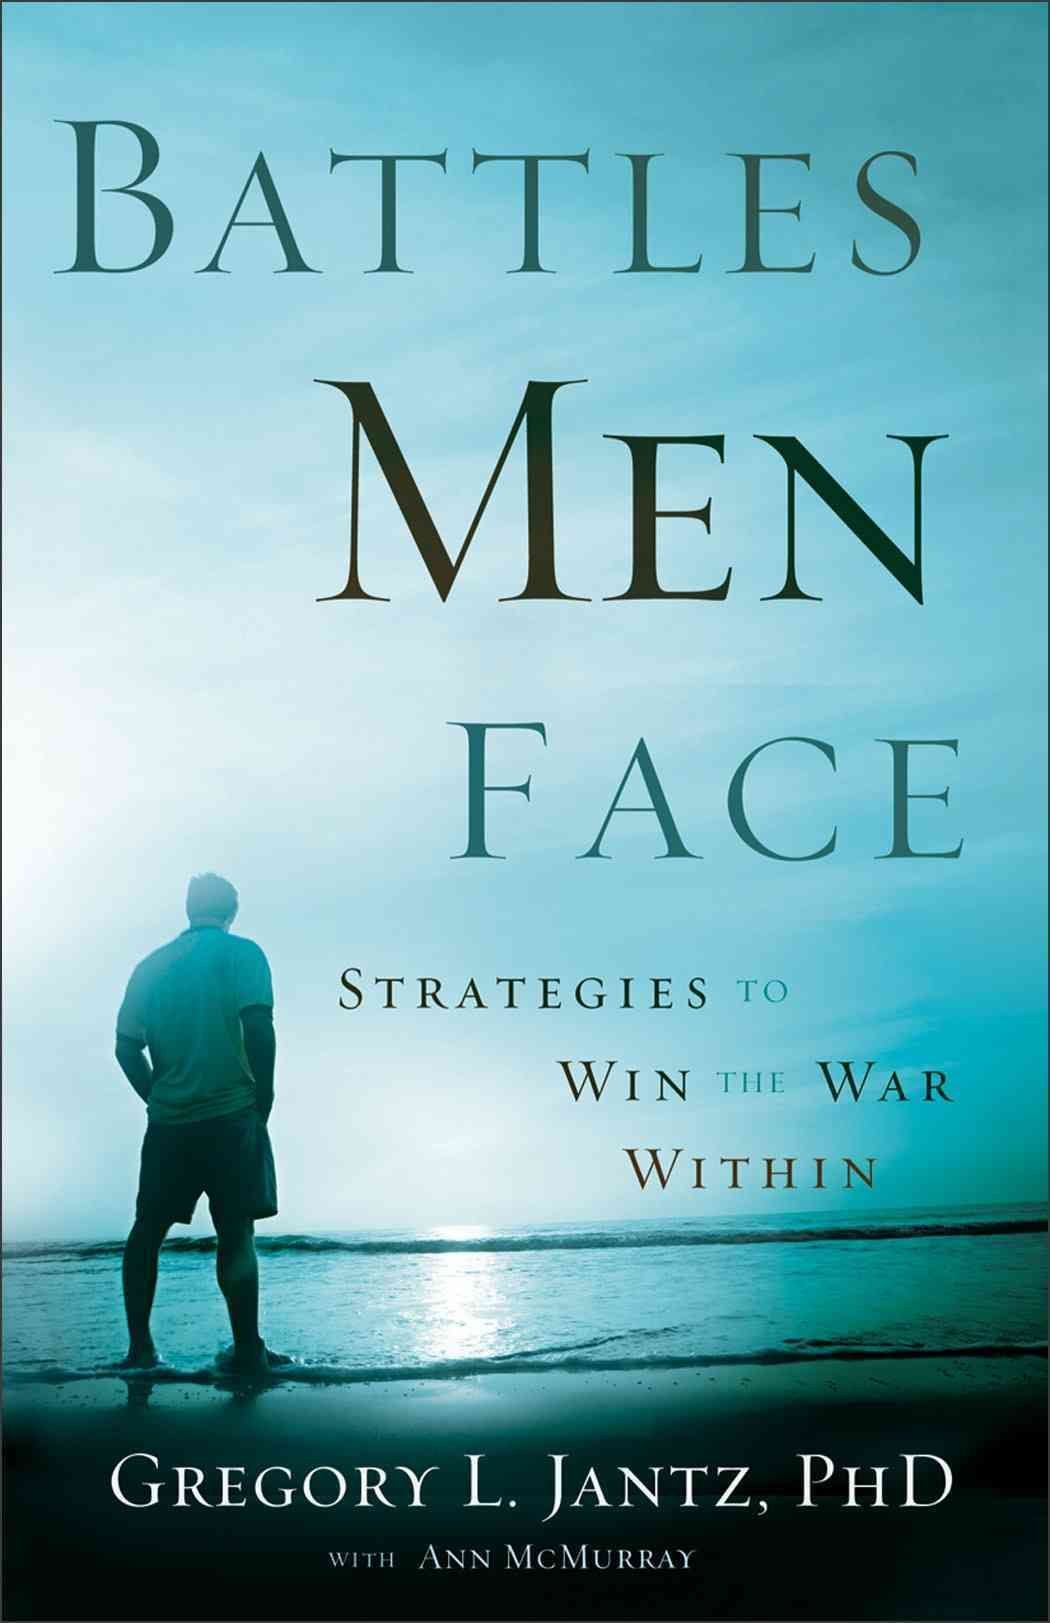 Battles Men Face - Strategies to Win the War Within